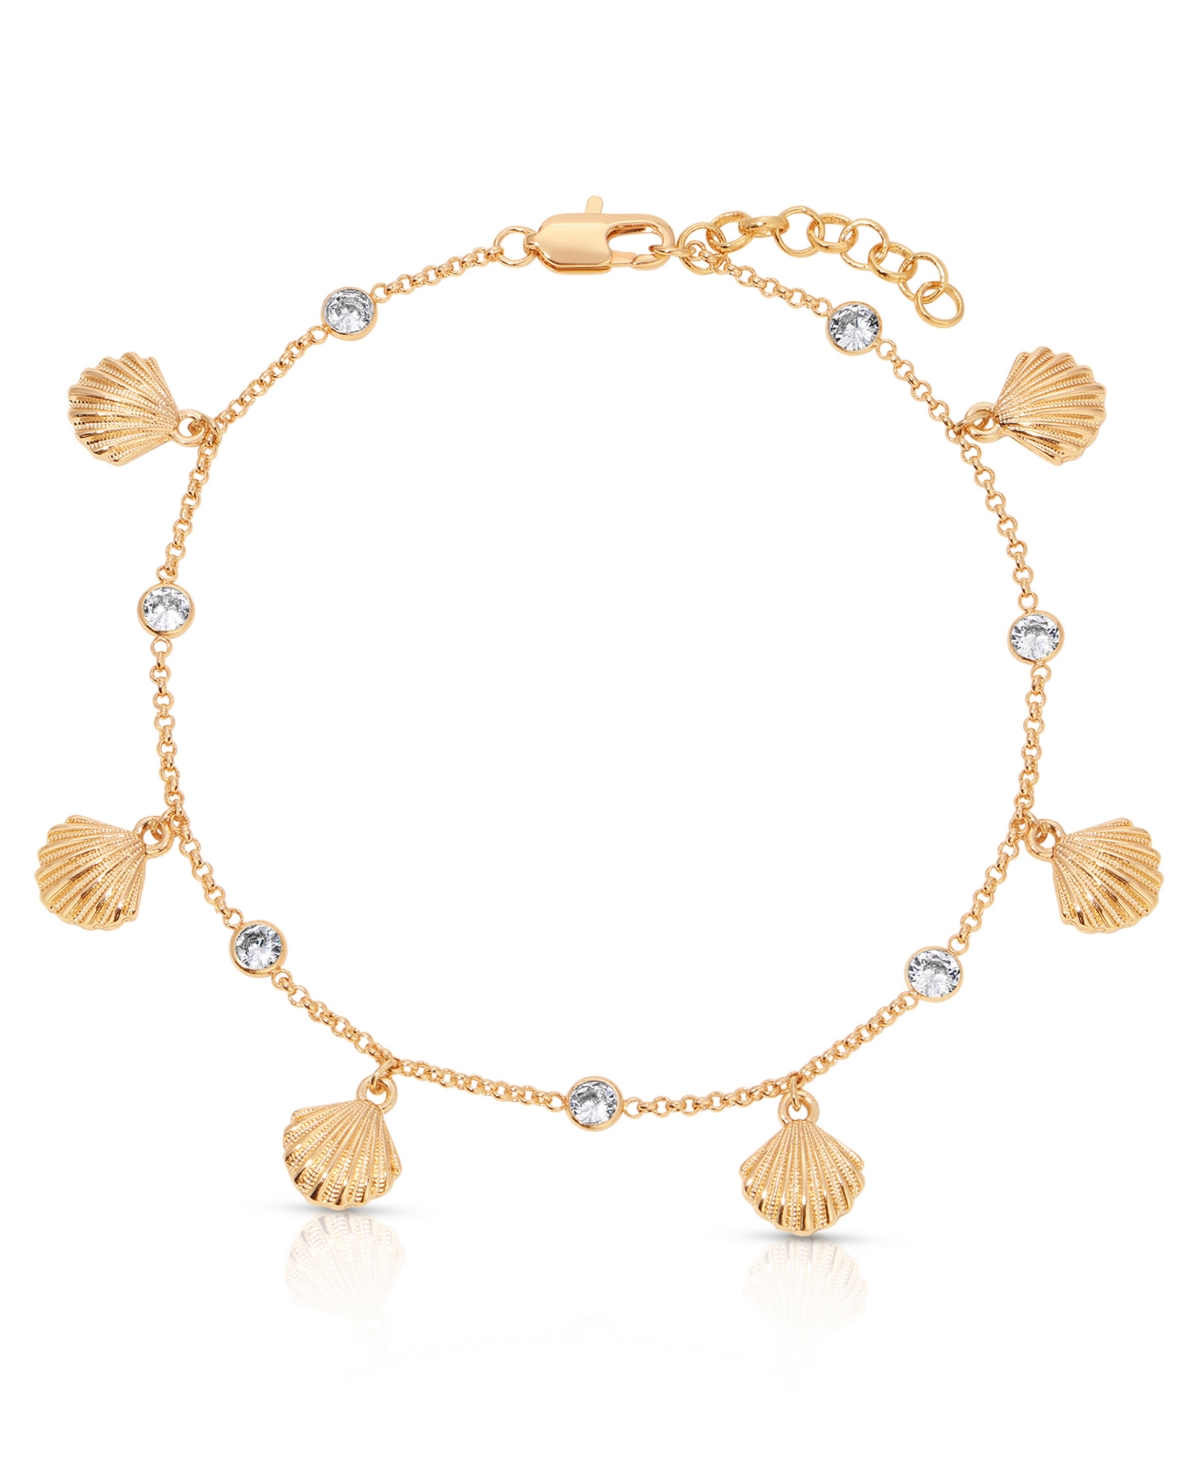 18k Gold Plated Scallop Shell Charm Anklet - Gold